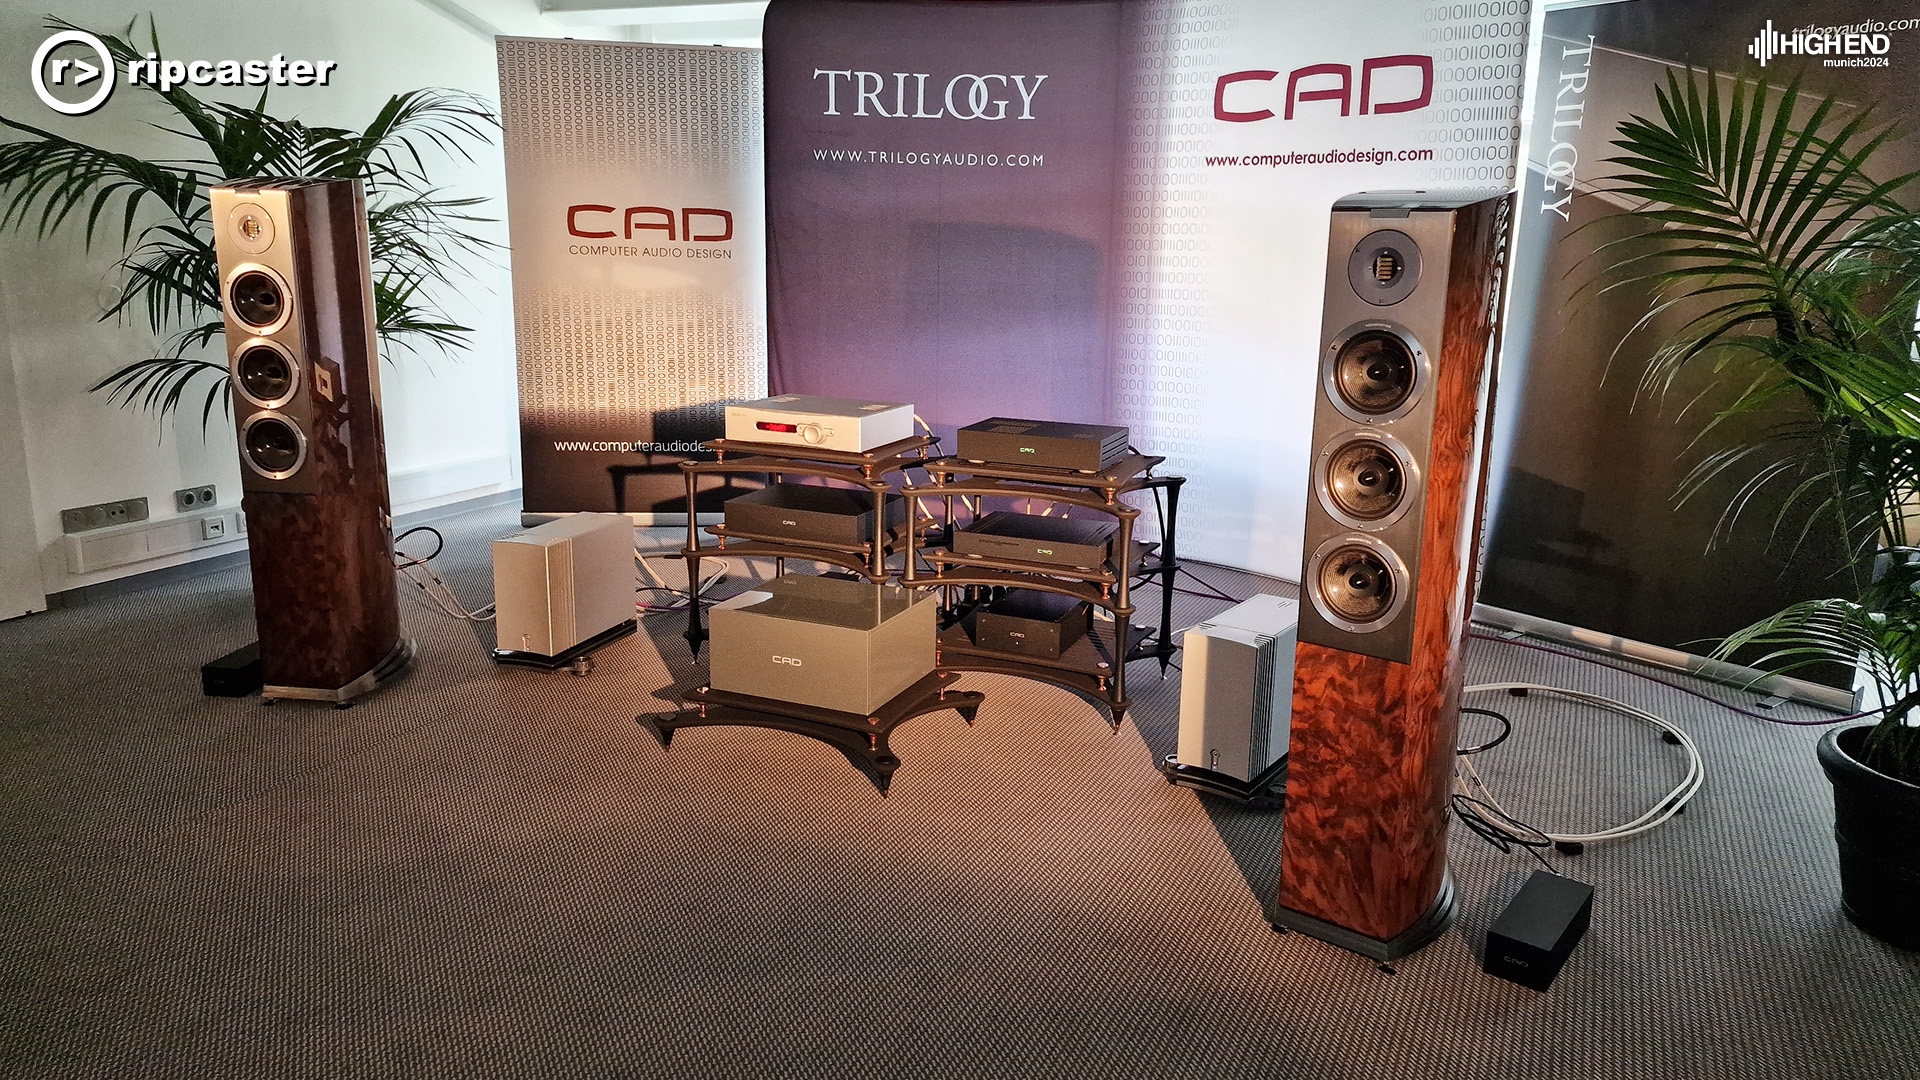 Trilogy.  A pair of floorstanding speakers with audio equipment on stands between them.